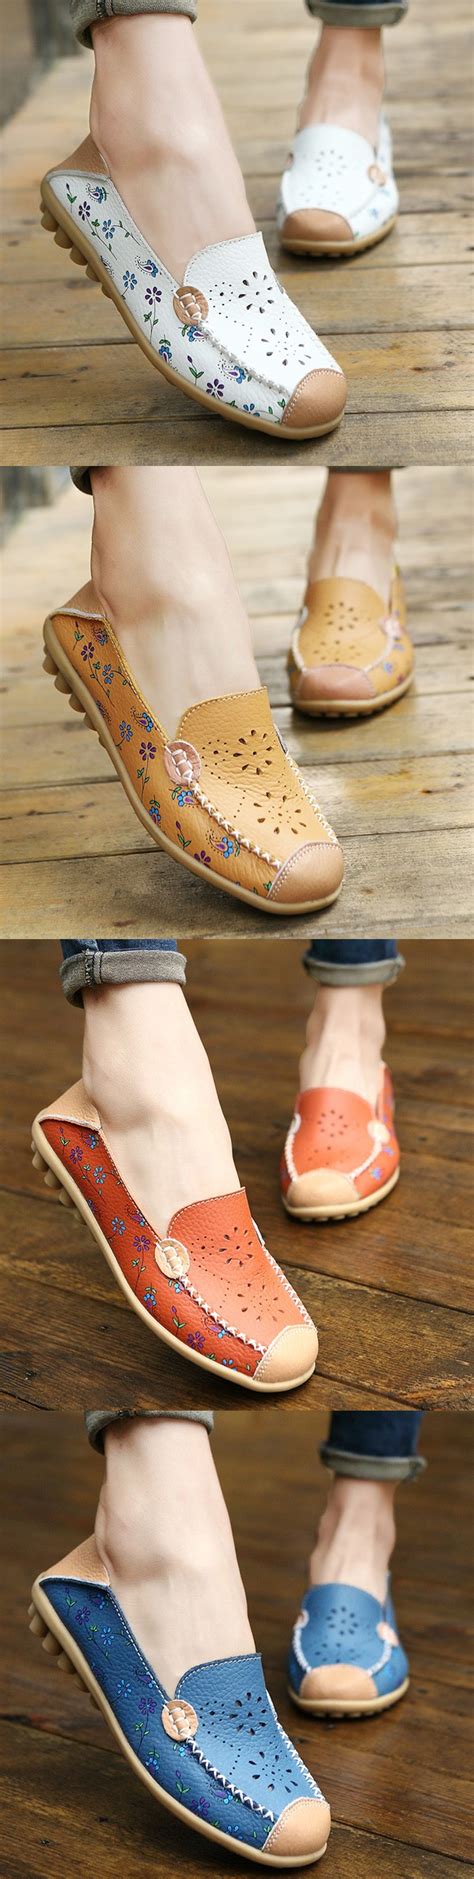 Lostisy Floral Print Hollow Out Breathable Color Match Casual Slip On